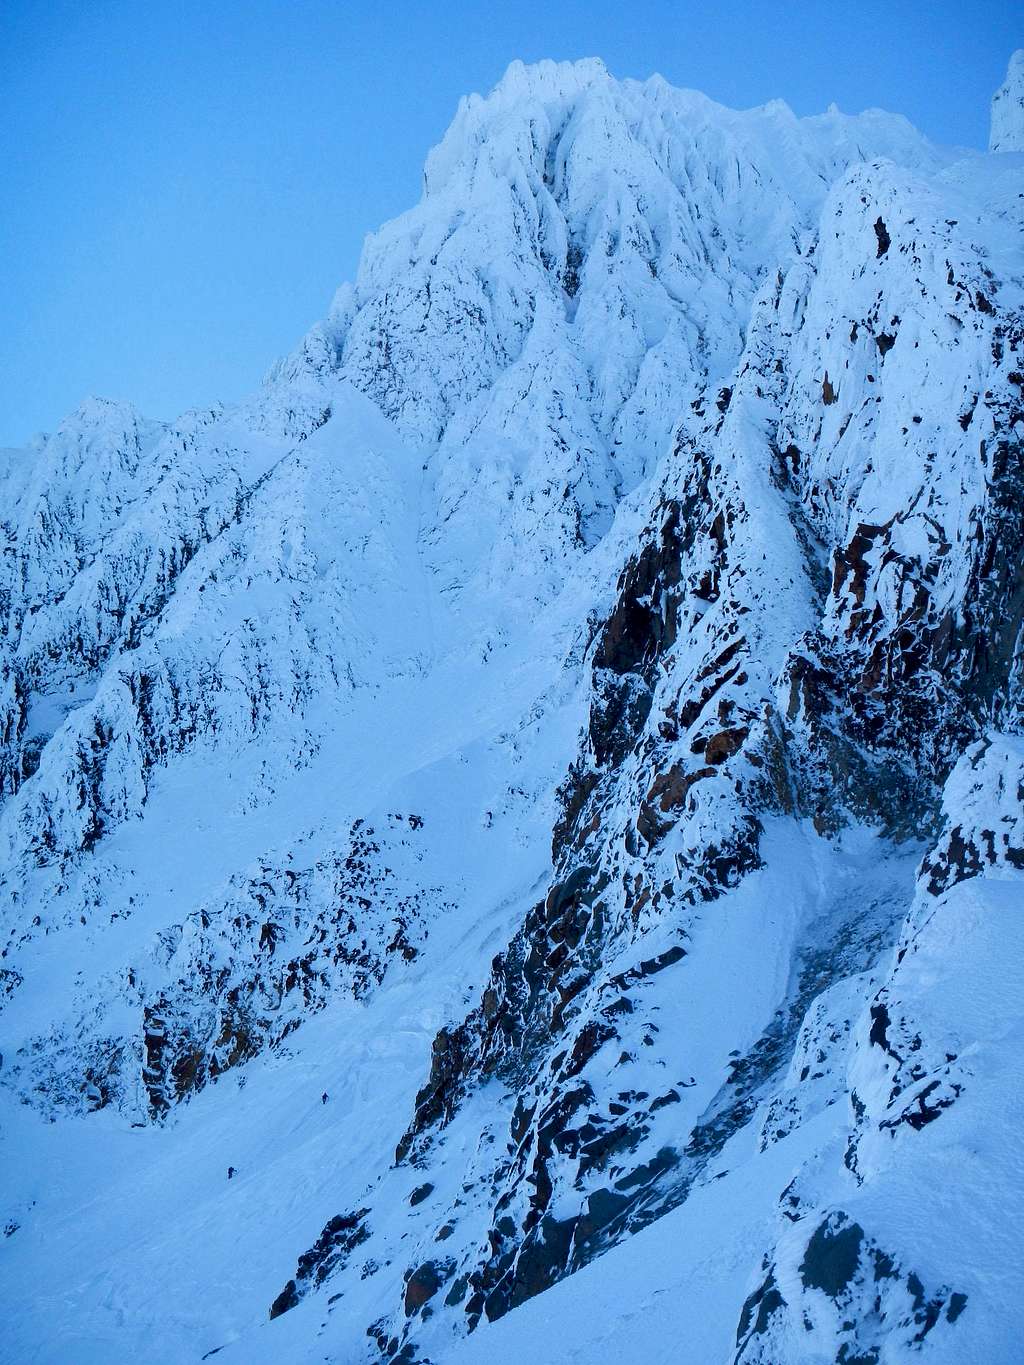 Two Climbers - Leuthold Couloir